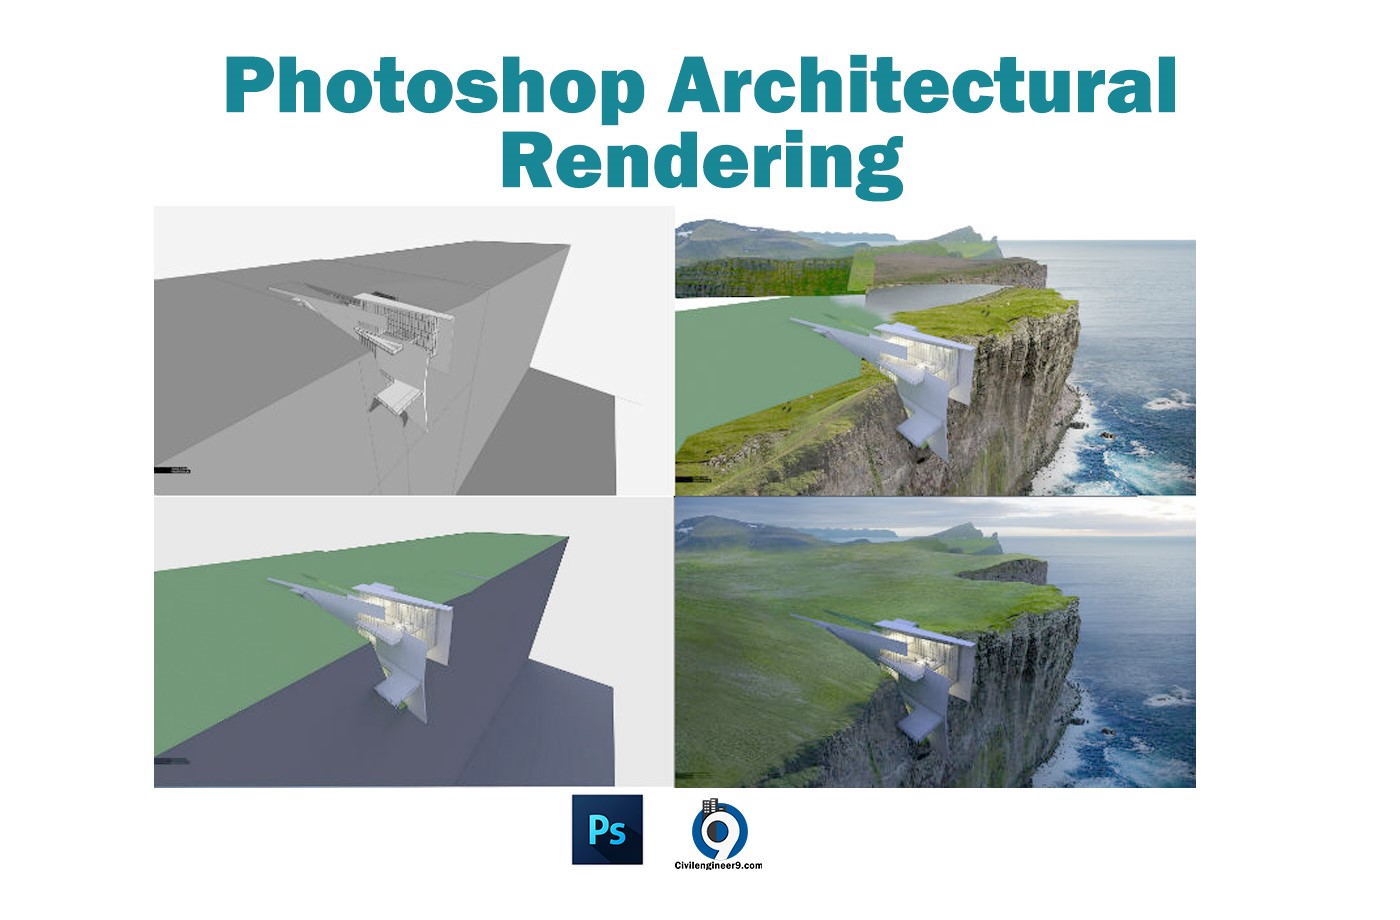 Photoshop Architectural rendering